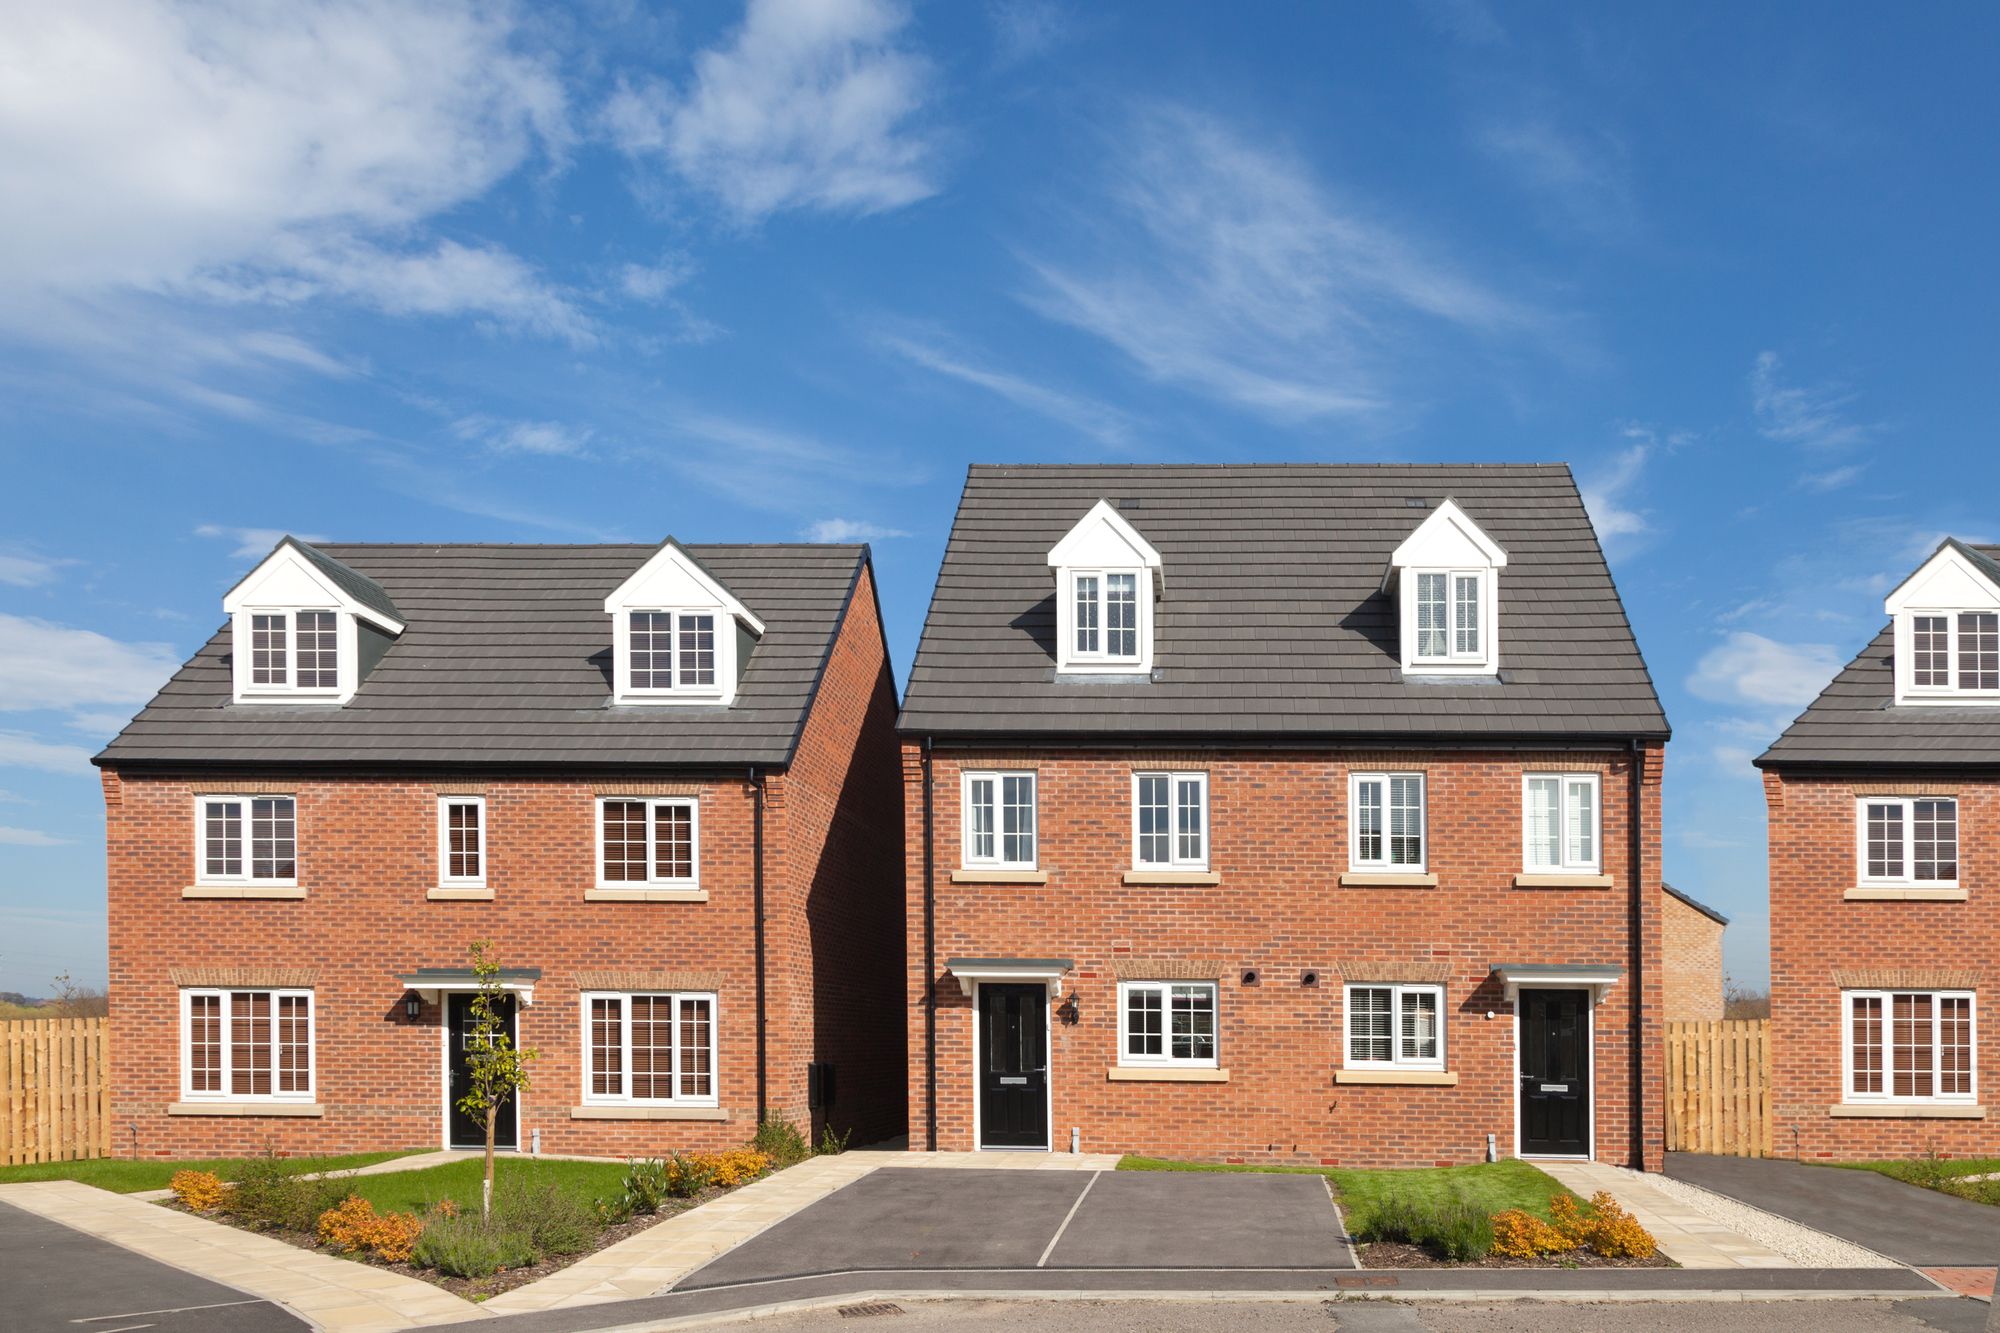 The myths of shared ownership